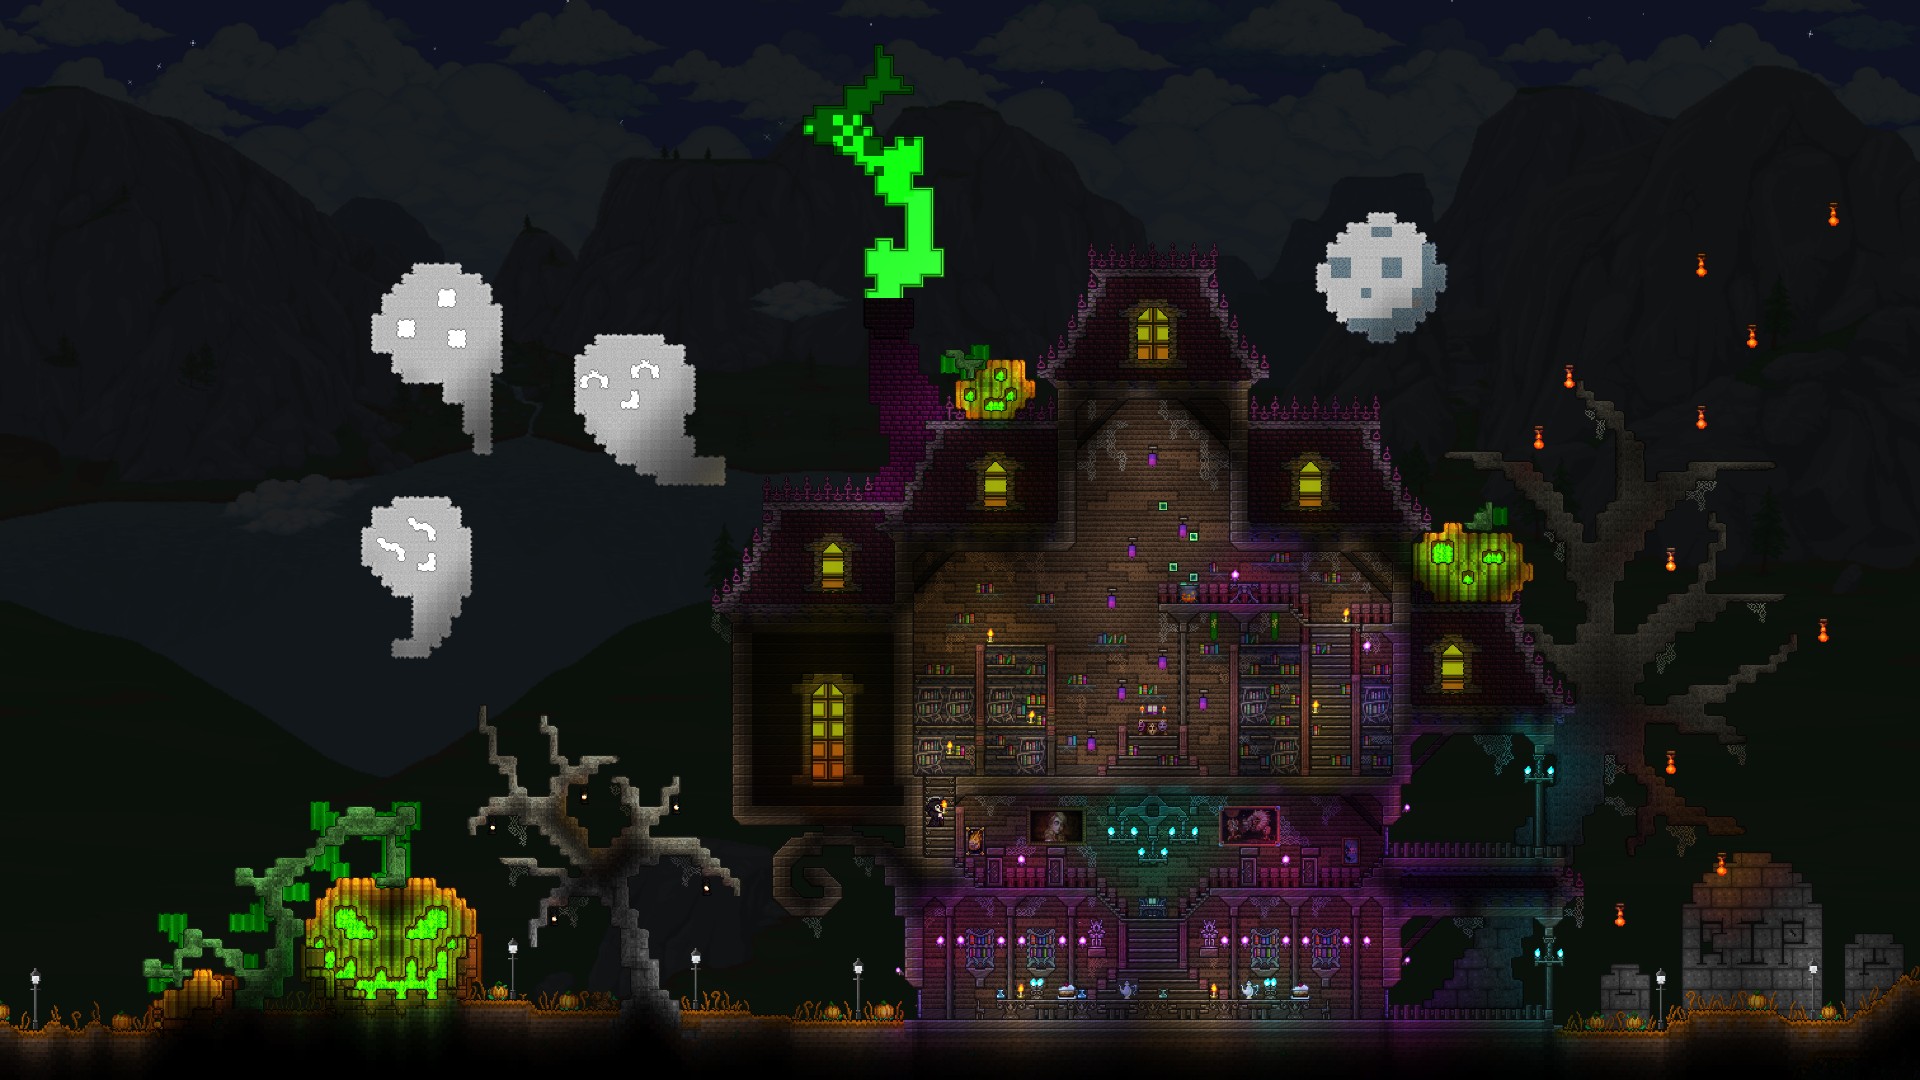 Terraria haunted house build with green and purple lighting, and ghosts surrounding it